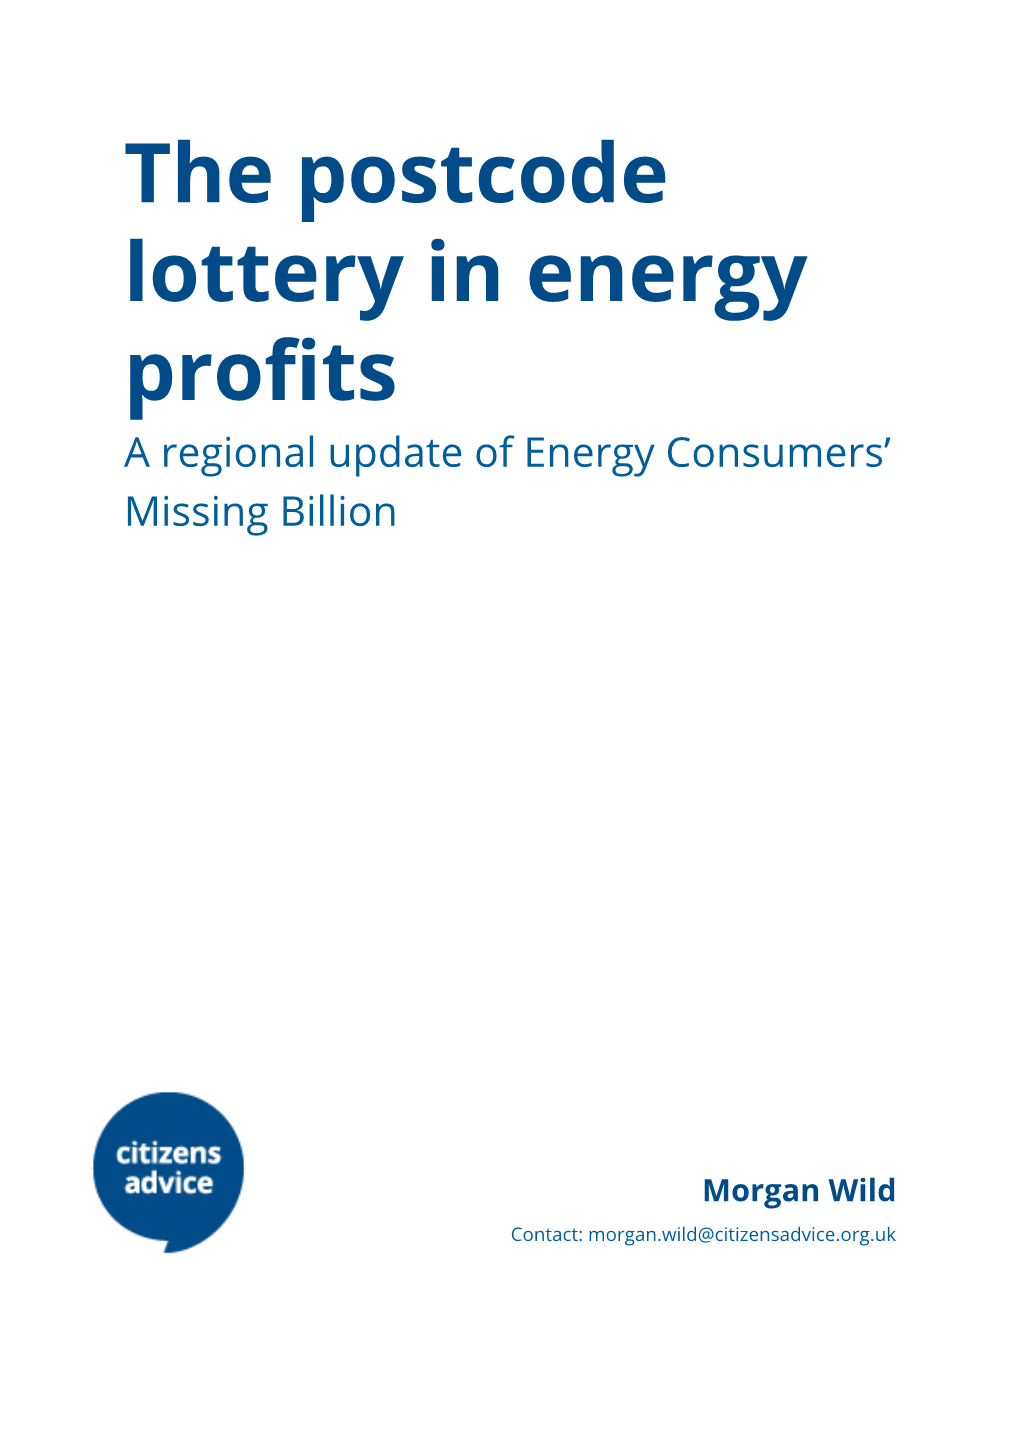 The Postcode Lottery in Energy Profits a Regional Update of Energy Consumers’